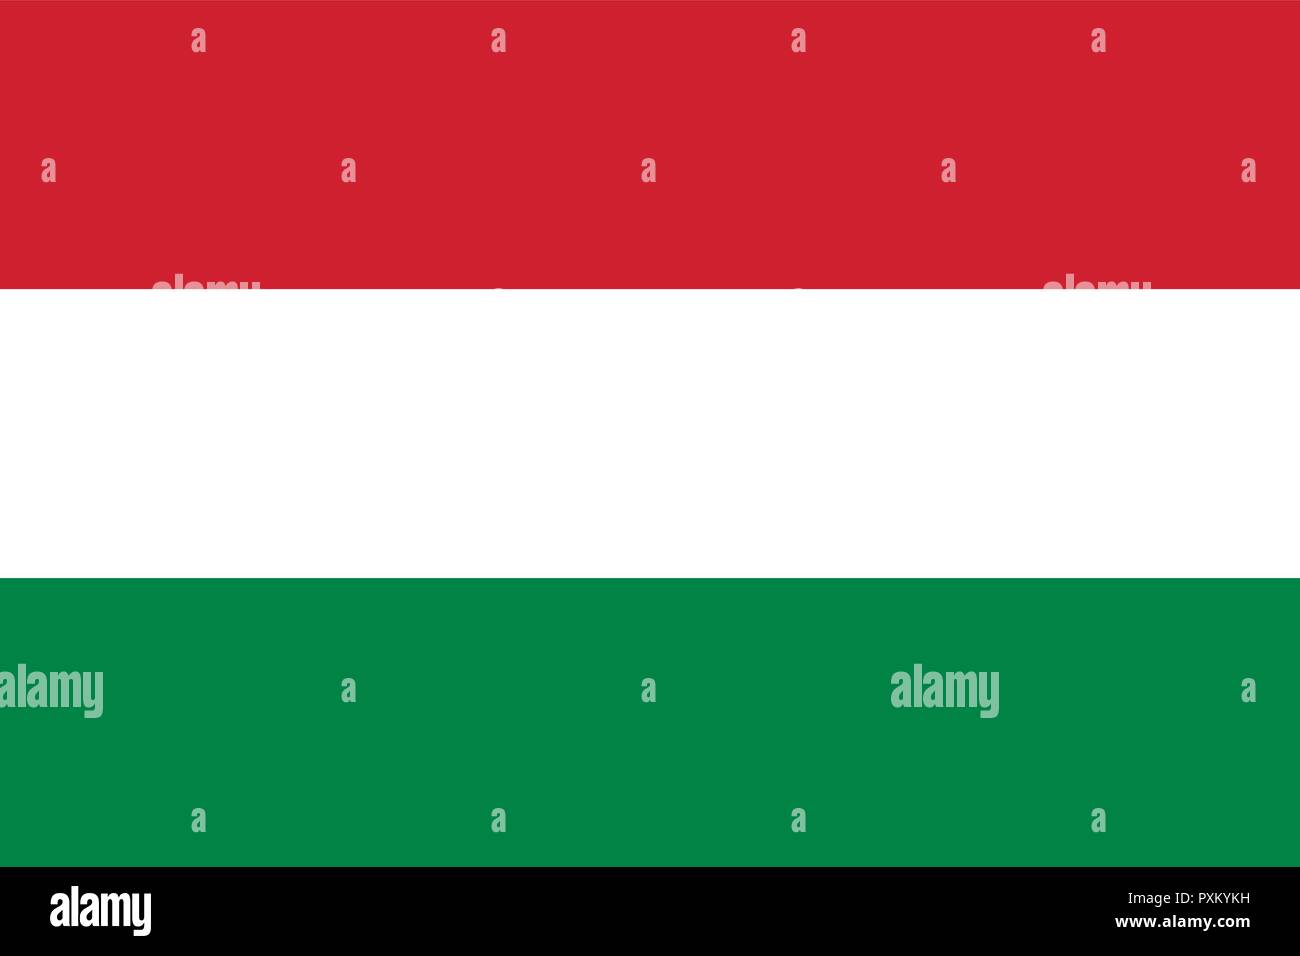 Vector image for Hungary flag. Based on the official and exact Hungarian flag dimensions (3:2) & colors (186C, White and 348C) Stock Vector